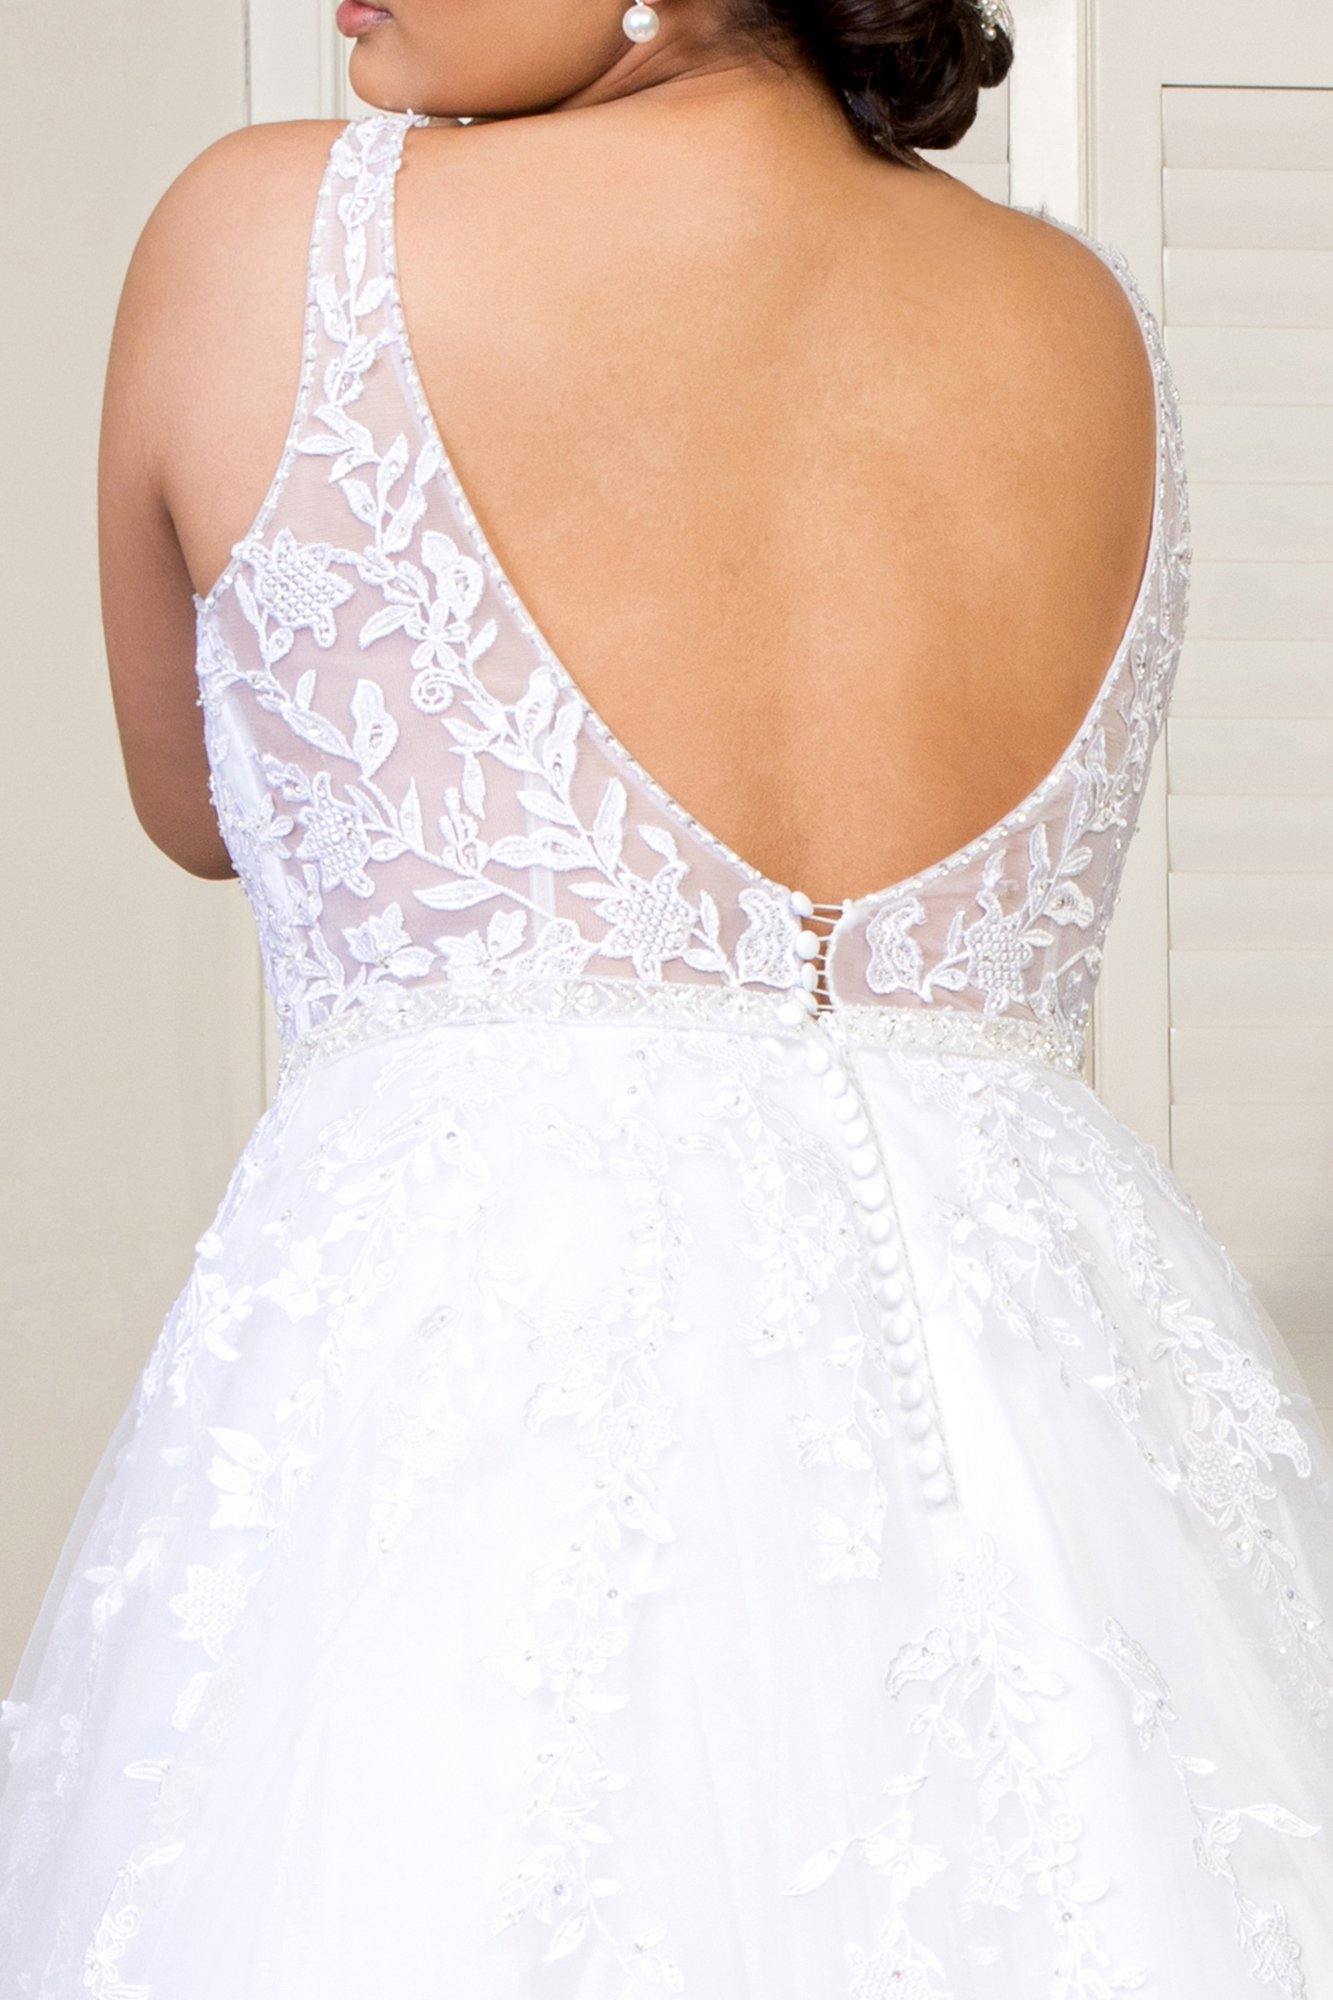 Long Sleeveless Embroidered Mesh Wedding Dress - The Dress Outlet